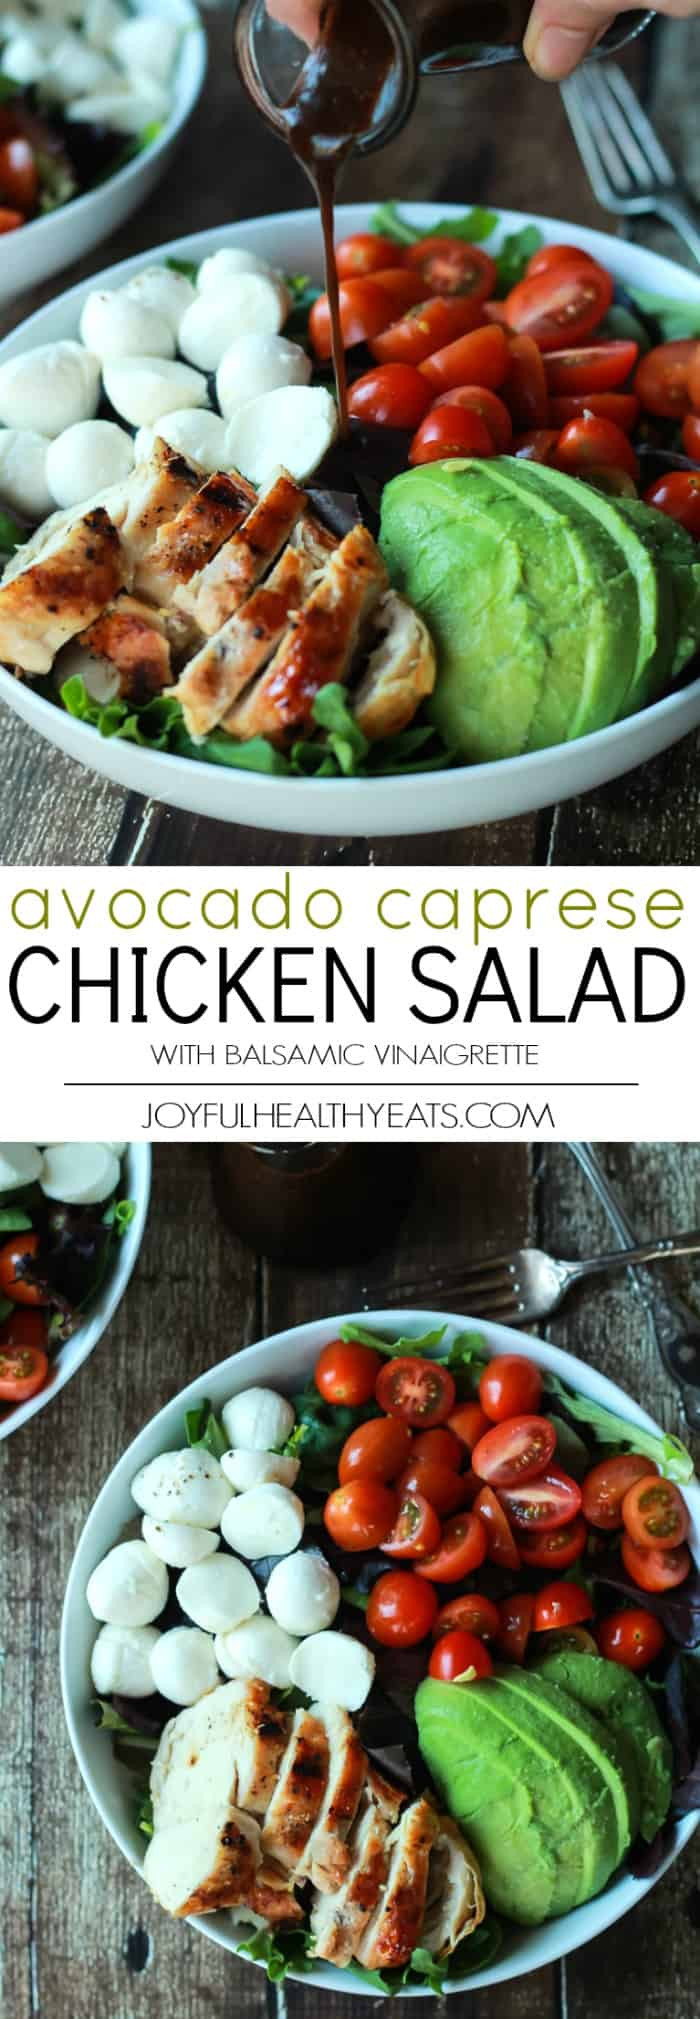 Easy Summer Dinners For Two
 15 Minute Avocado Caprese Chicken Salad with Balsamic